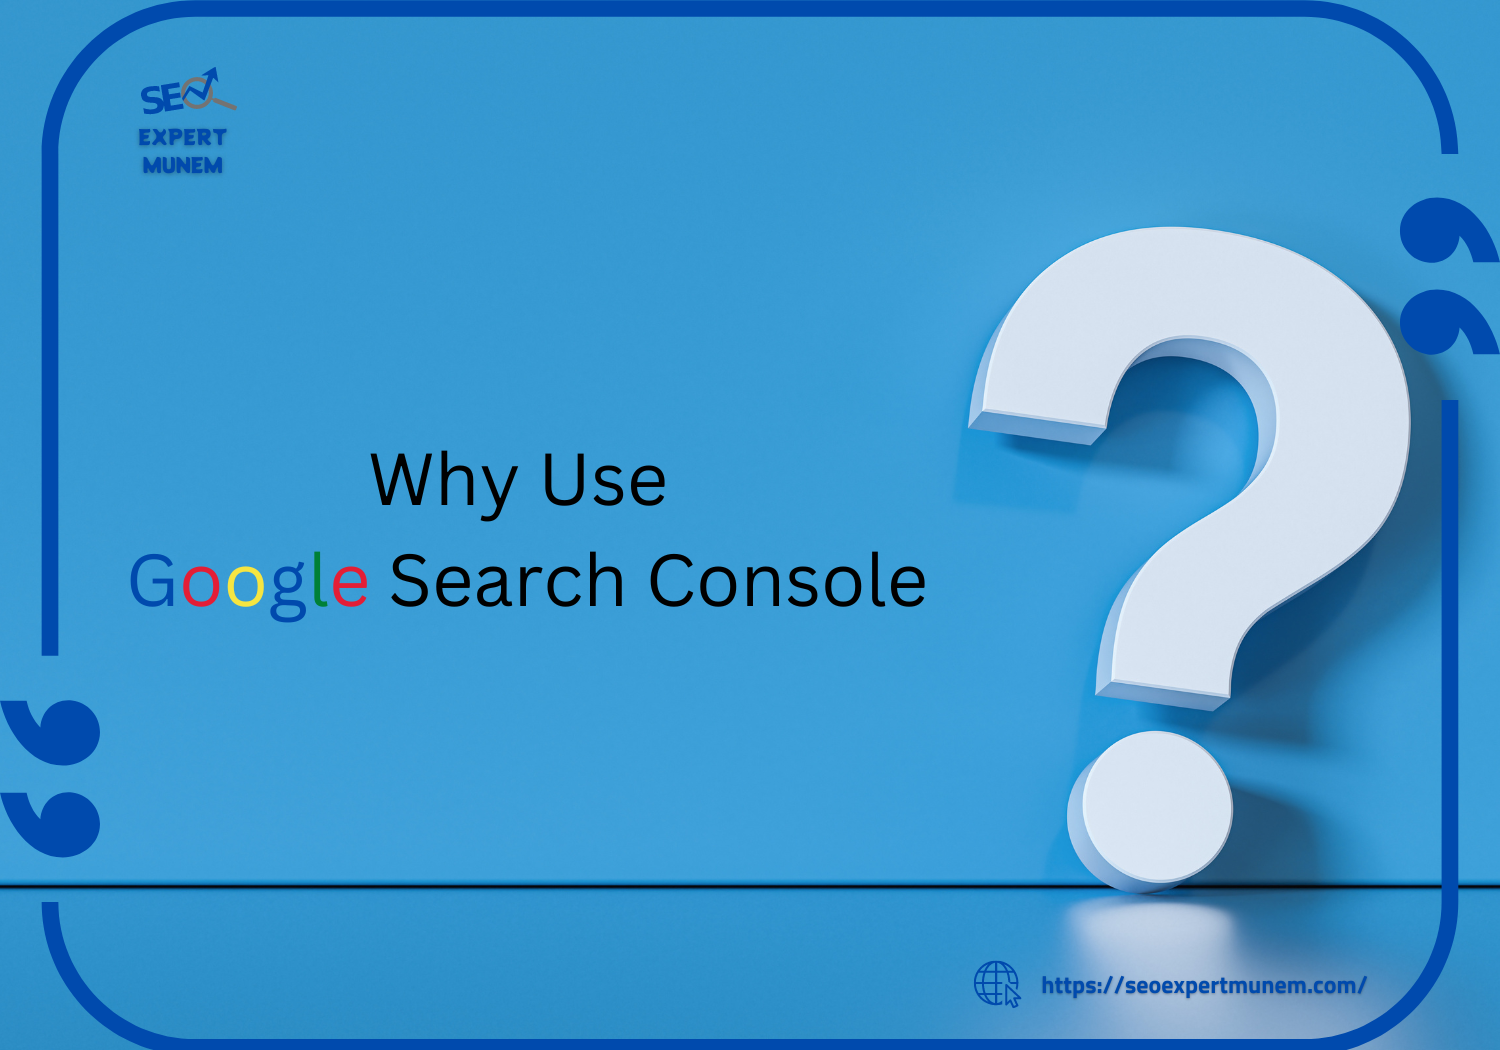 Why Use Google Search Console